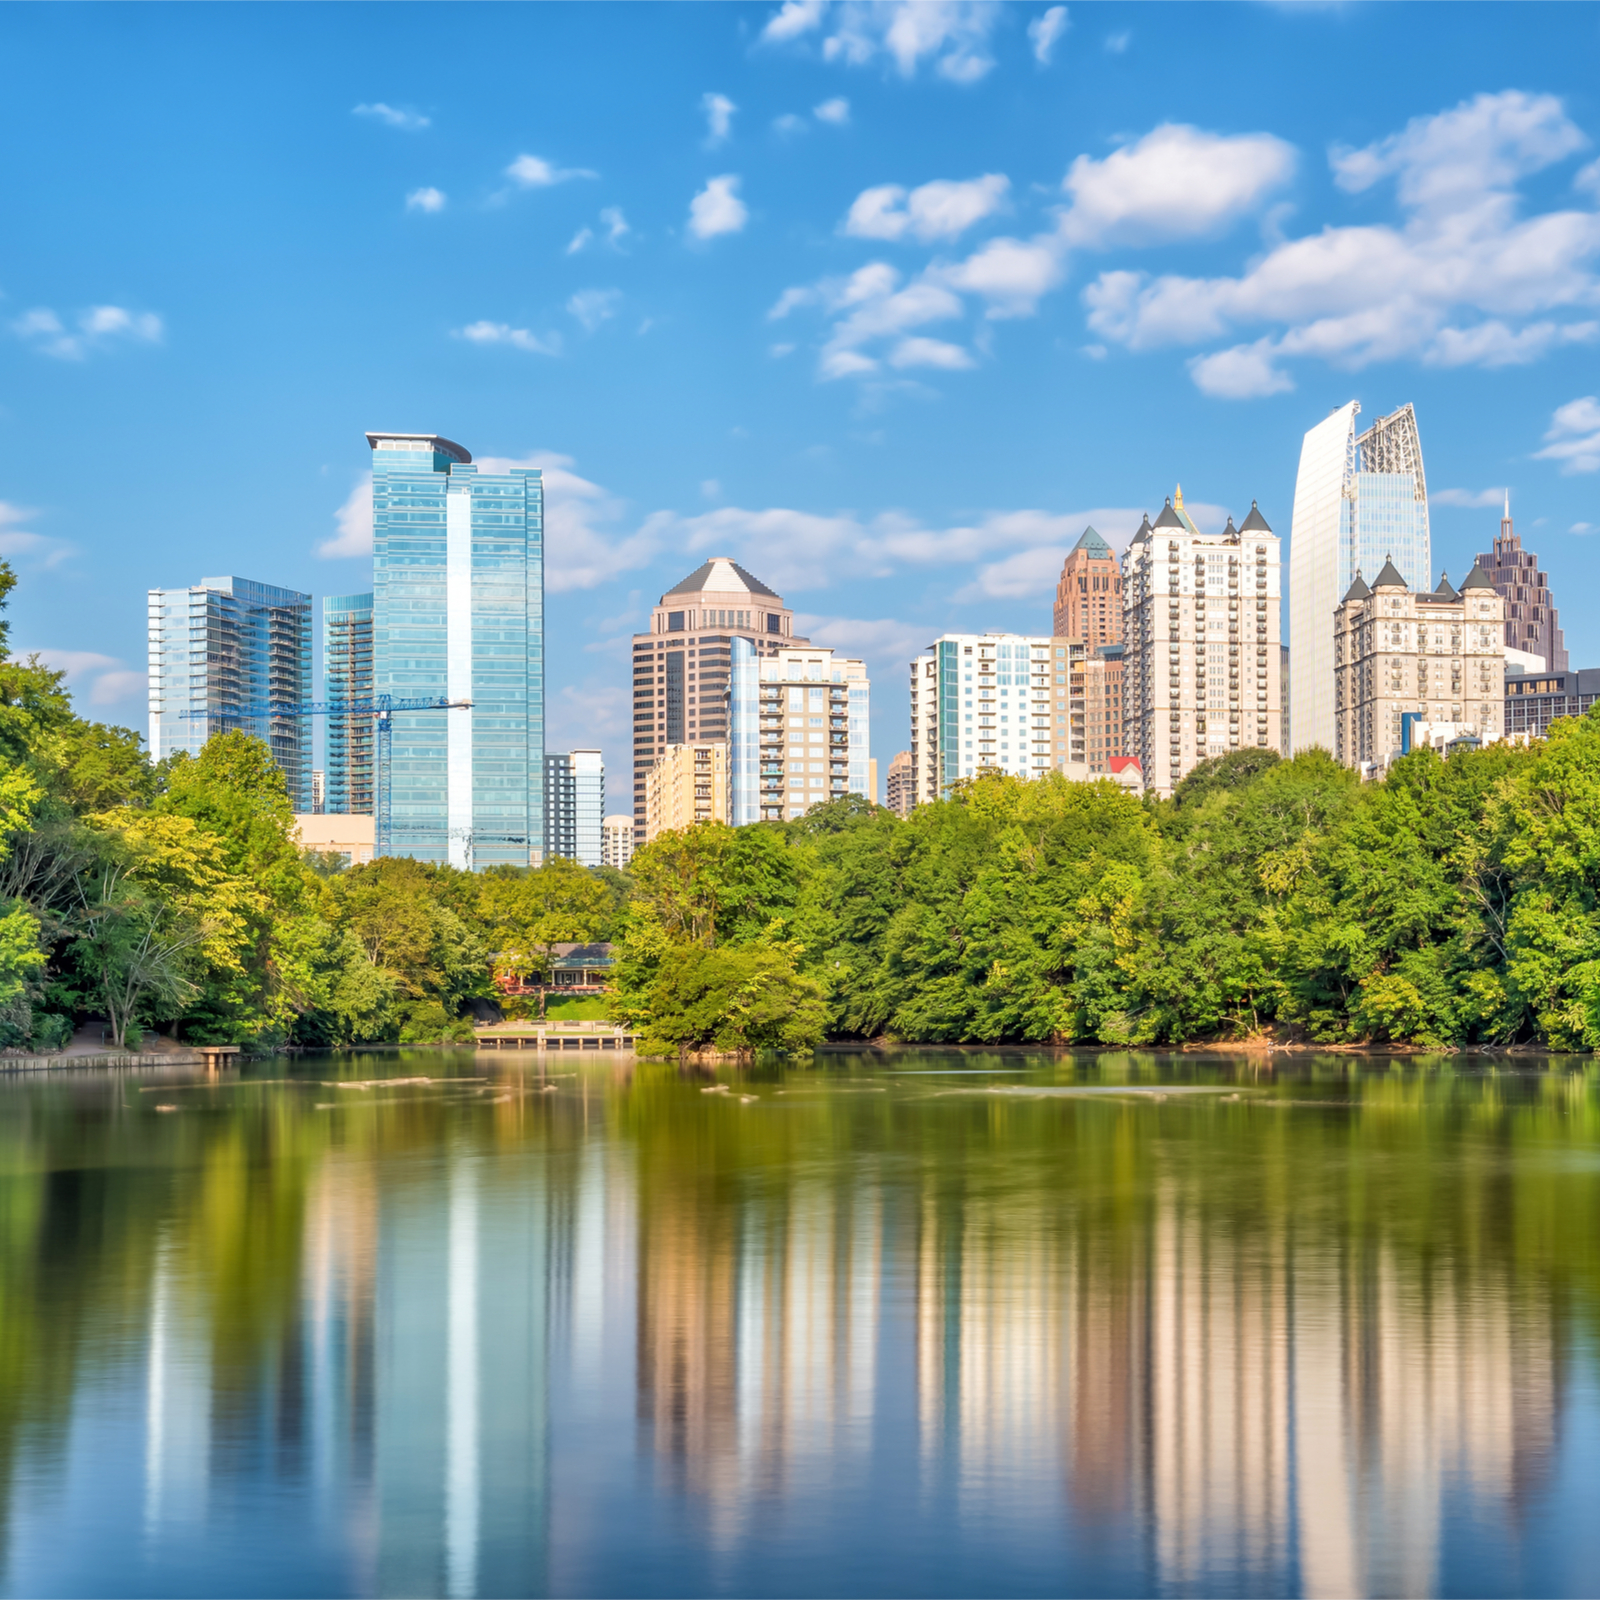 Coinsource Adds 18 Bitcoin ATMs in Atlanta, Among Ten Most Unbanked US Cities